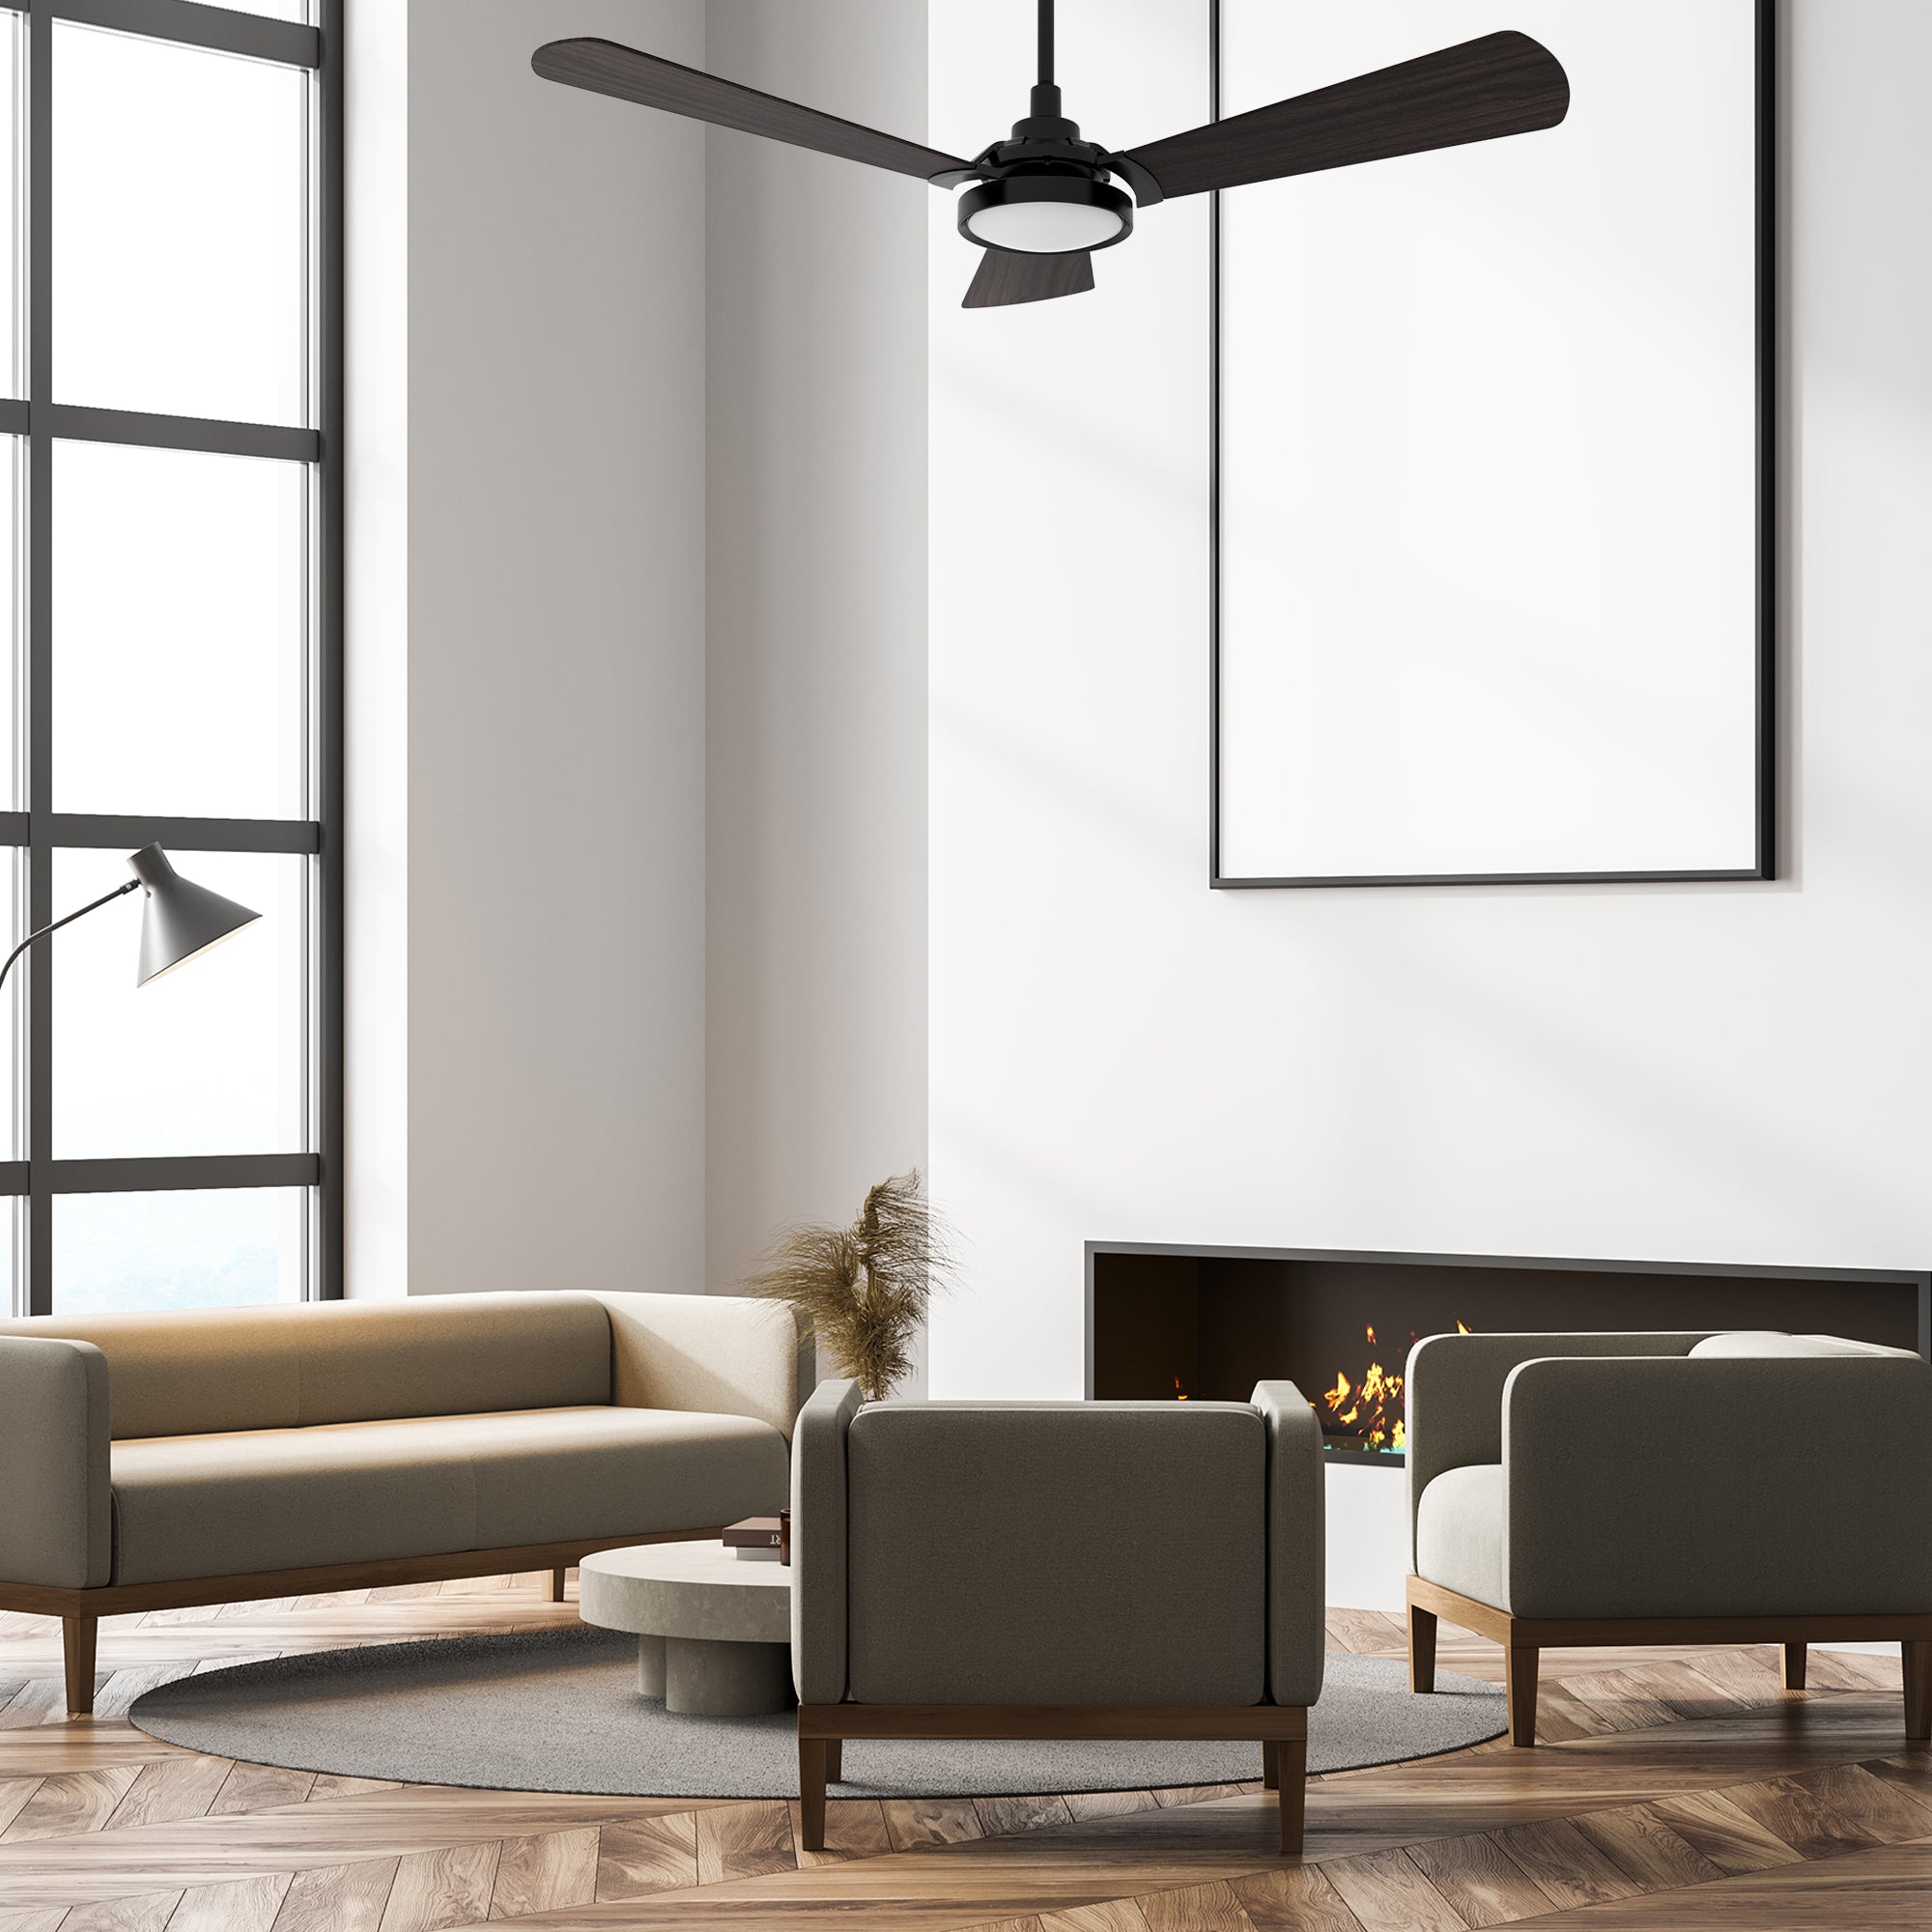 This Smafan Veter 56&#39;&#39; smart ceiling fan keeps your space cool, bright, and stylish. It is a soft modern masterpiece perfect for your large indoor living spaces. This Wifi smart ceiling fan is a simplicity designing with White finish, use elegant Plywood blades, Glass shade and has an integrated 4000K LED daylight. The fan features Remote control, Wi-Fi apps, Siri Shortcut and Voice control technology (compatible with Amazon Alexa and Google Home Assistant ) to set fan preferences.